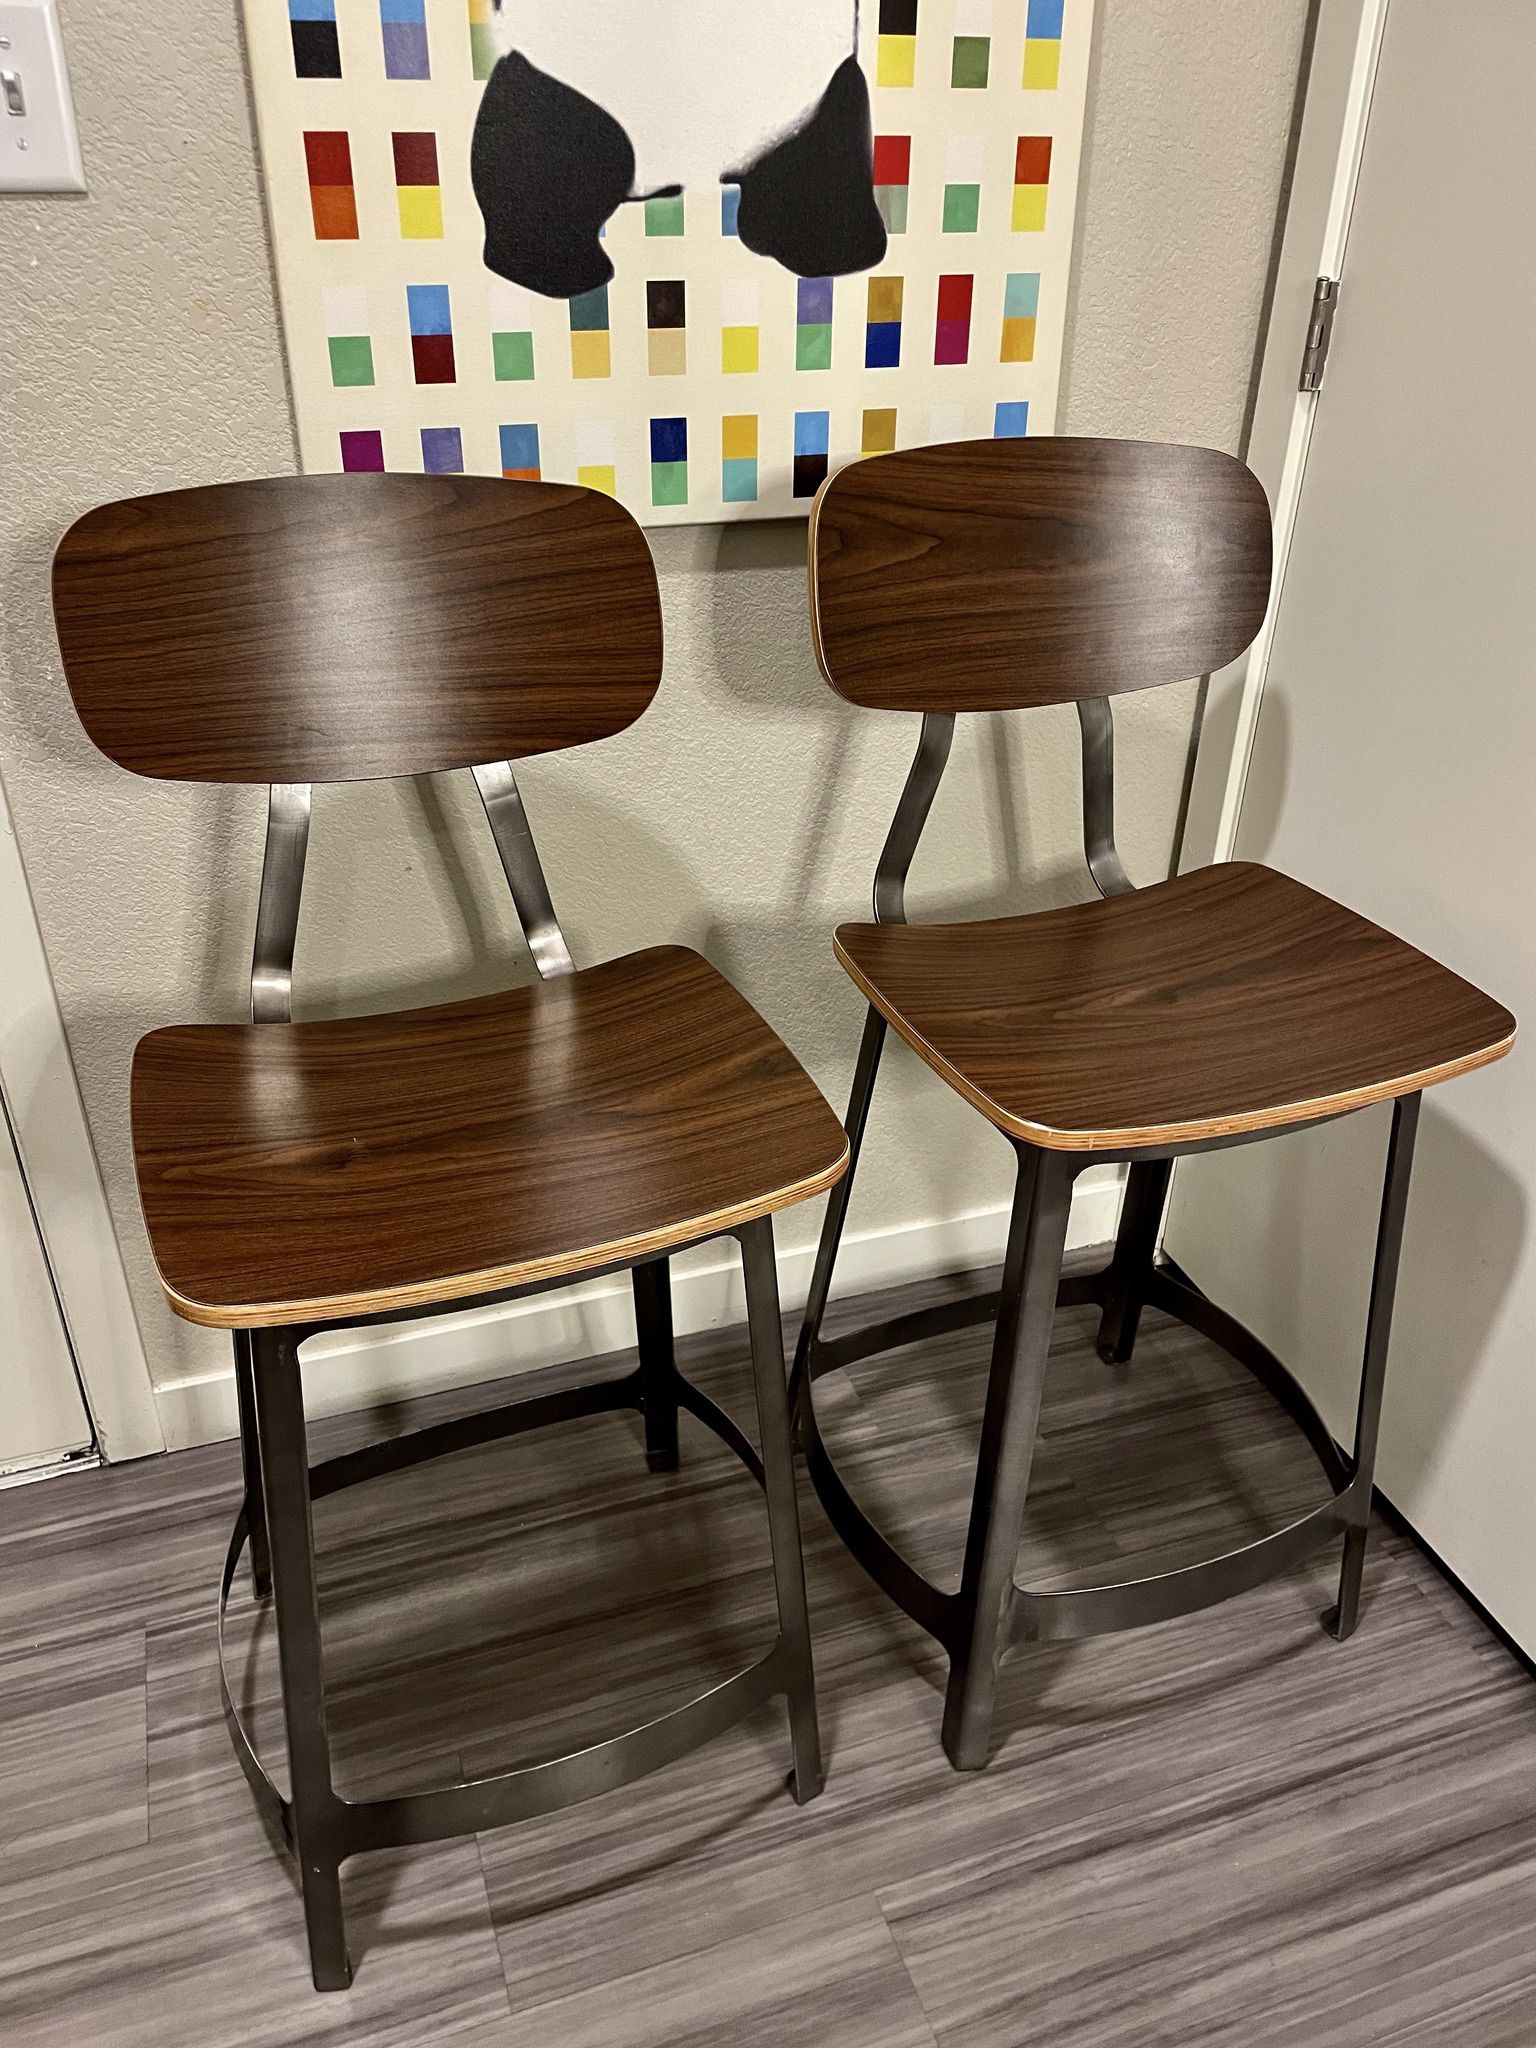 VERY RARE HERMAN MILLER STUDIO PROJECT CHAIRS! IMPORTANT MIDCENTURY MODERN PIECES!